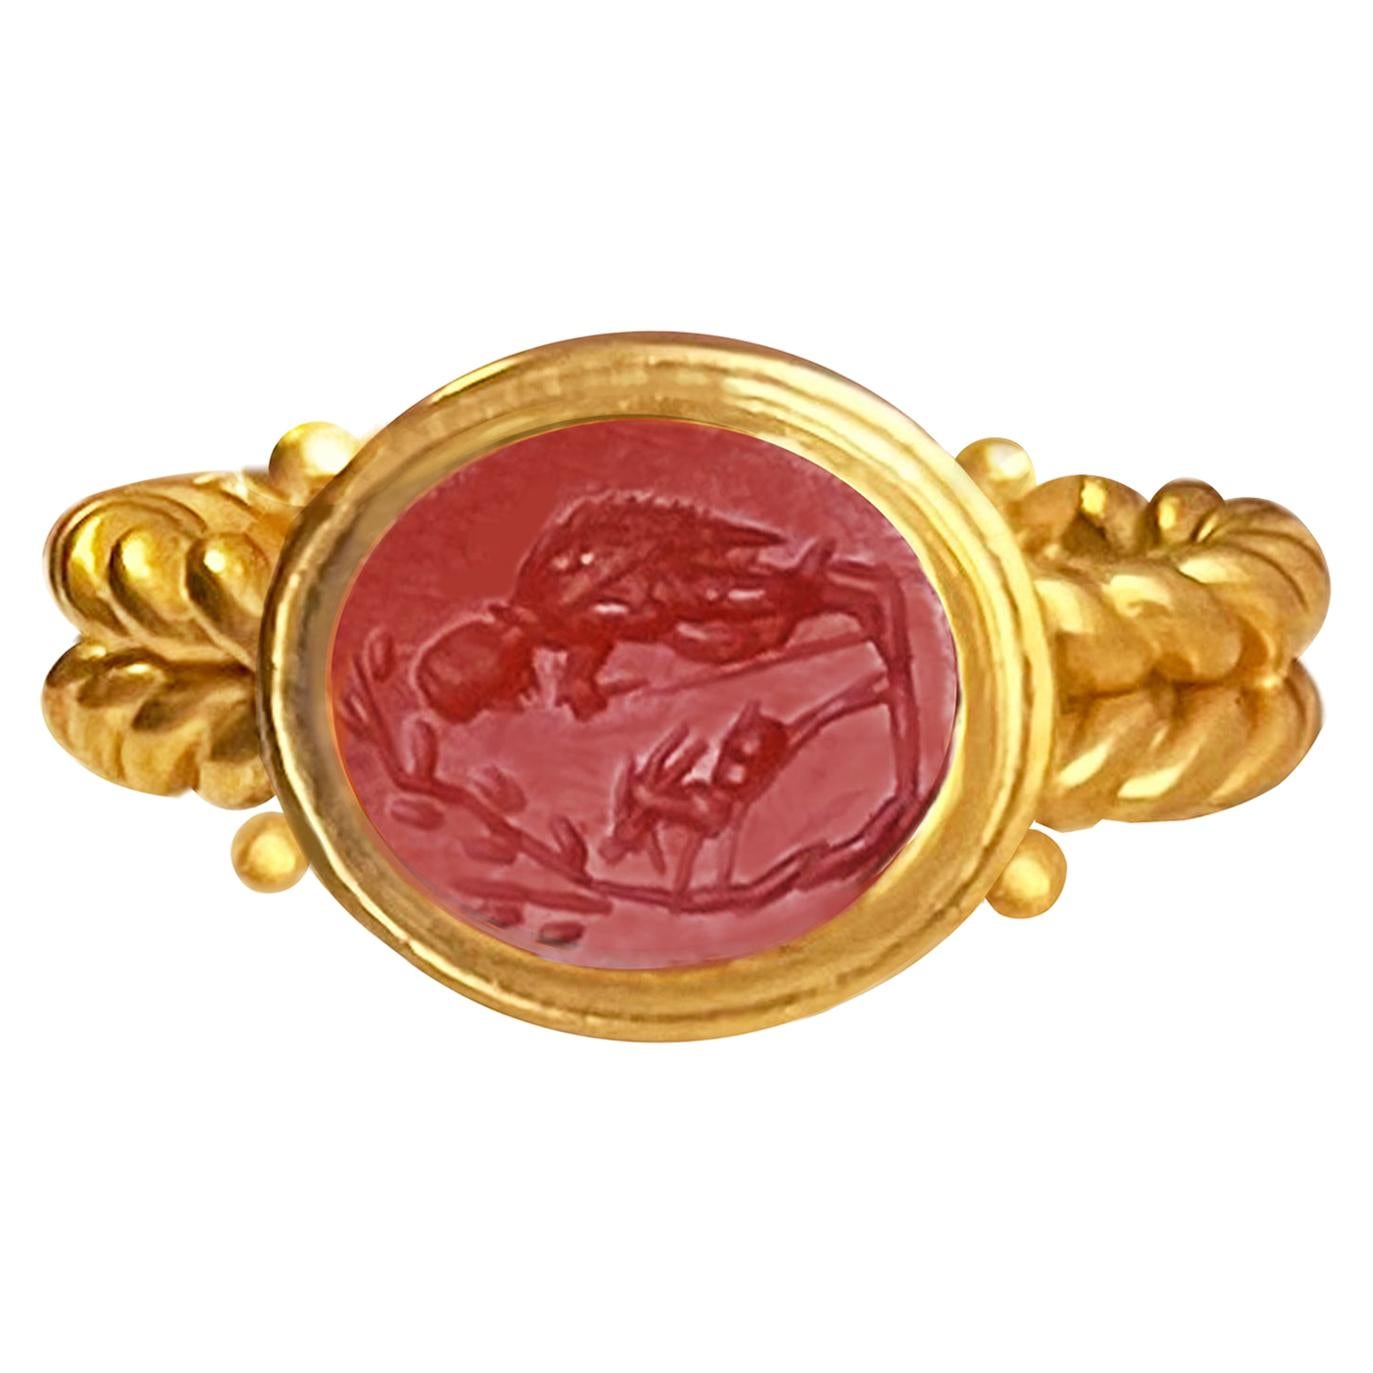 Roman Intaglio 2nd Century AD 18 Kt Gold Ring Depicting the Goat Amalthea